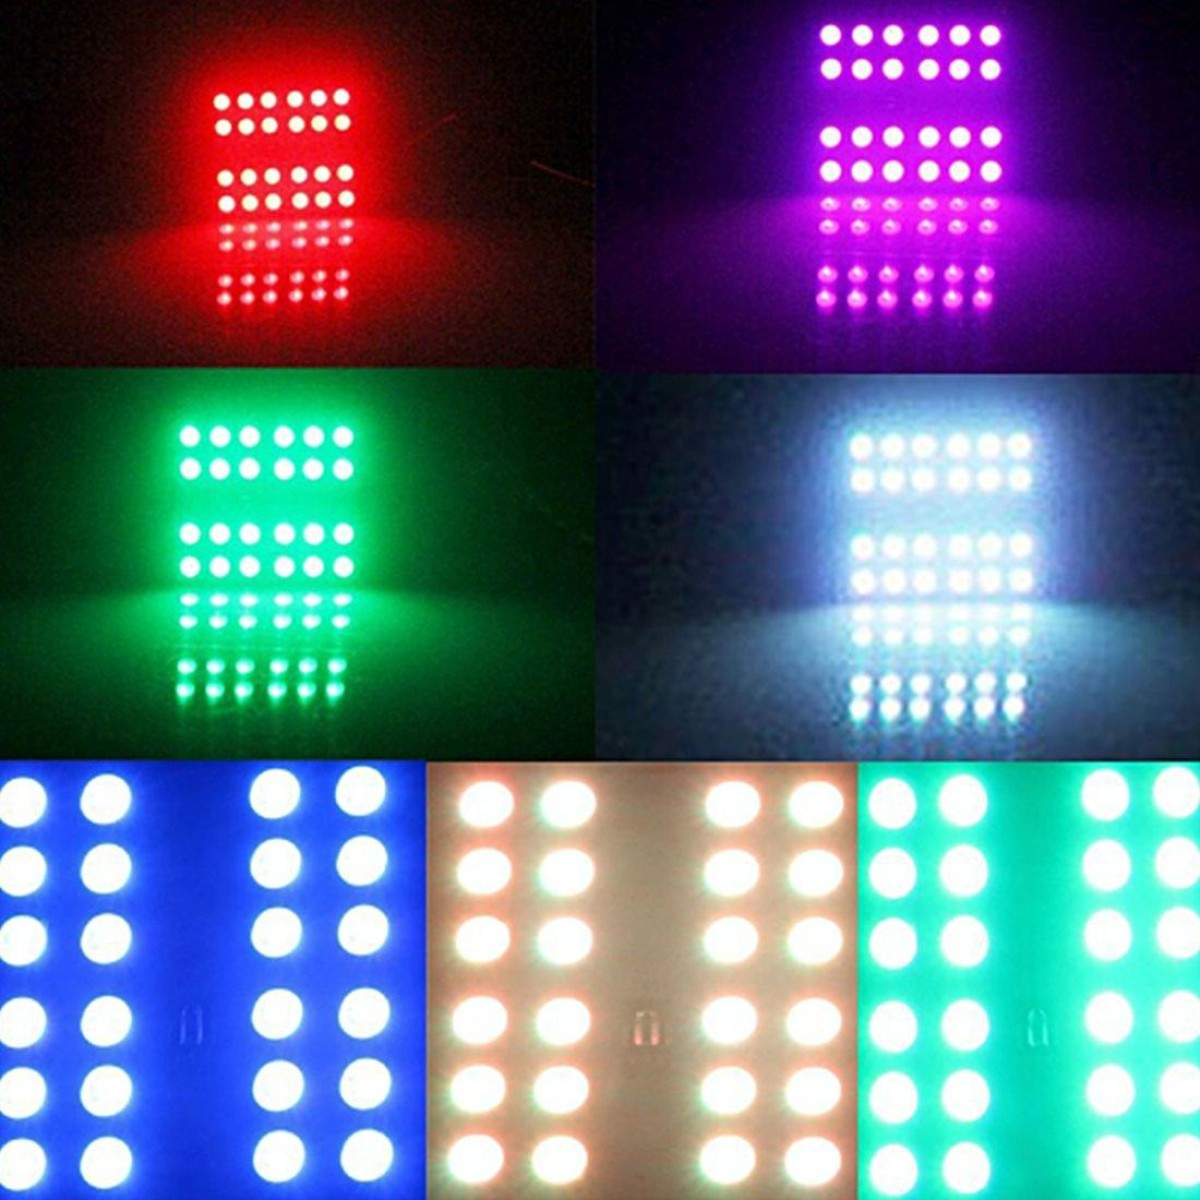 2 PCS Colorful 31MM Bicuspid Remote Control Car Dome Lamp LED Reading Light with 6 LED Lights